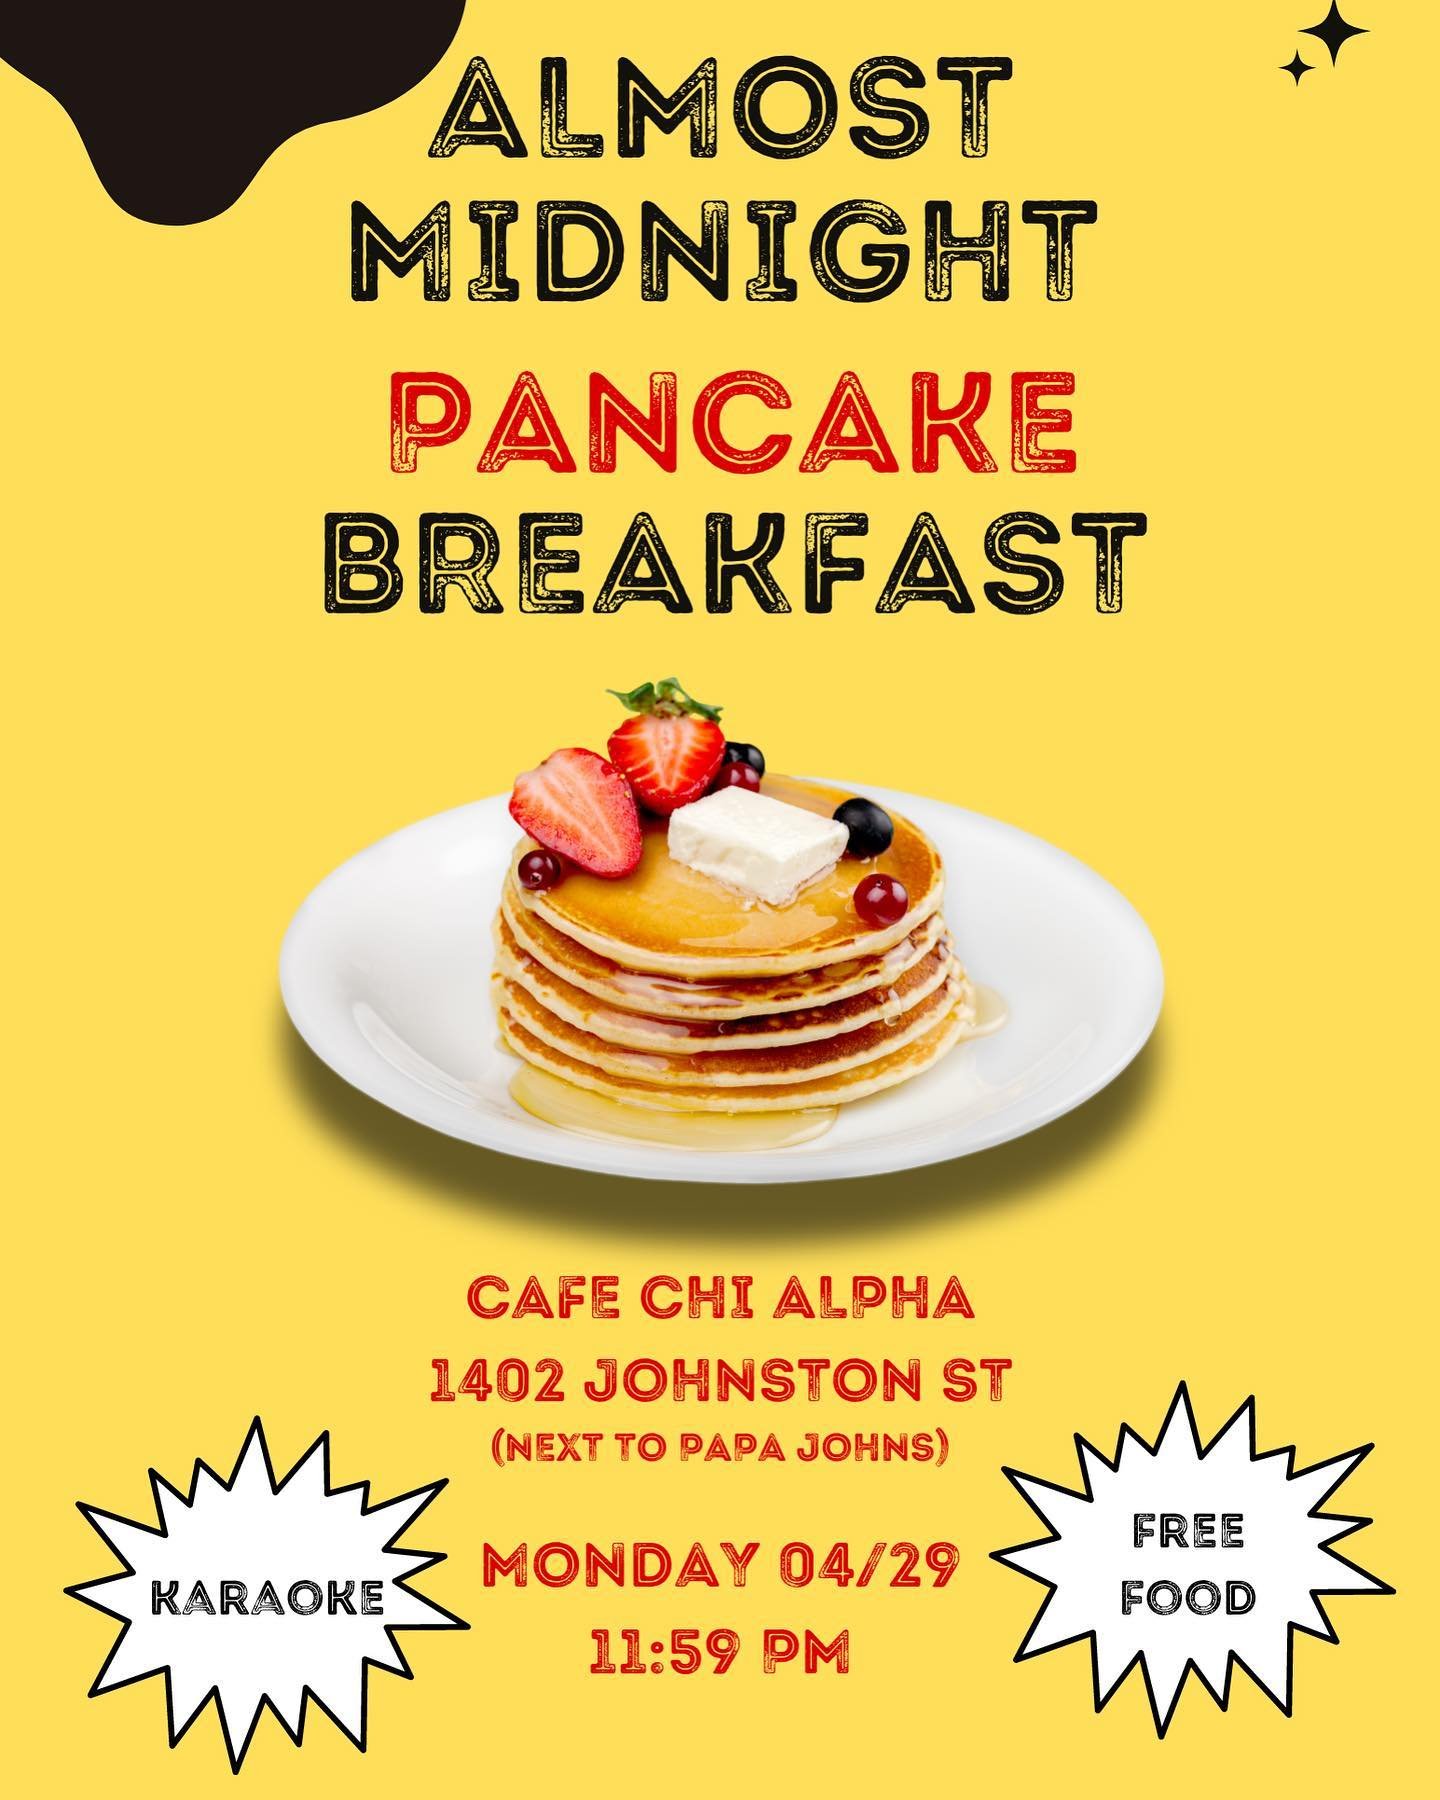 YOU ALREADY KNOW WHAT IT IS ‼️
It&rsquo;s that time of the semester🎉🎉
Take a break from your studying tonight and come join us for 
🥞ALMOST MIDNIGHT PANCAKE BREAKFAST🥞
✨✨✨✨✨✨✨✨✨✨✨✨✨
11:59pm⏰
Caf&eacute; Chi Alpha🏠
Karaoke🎤
Pancakes🍽️
See you t